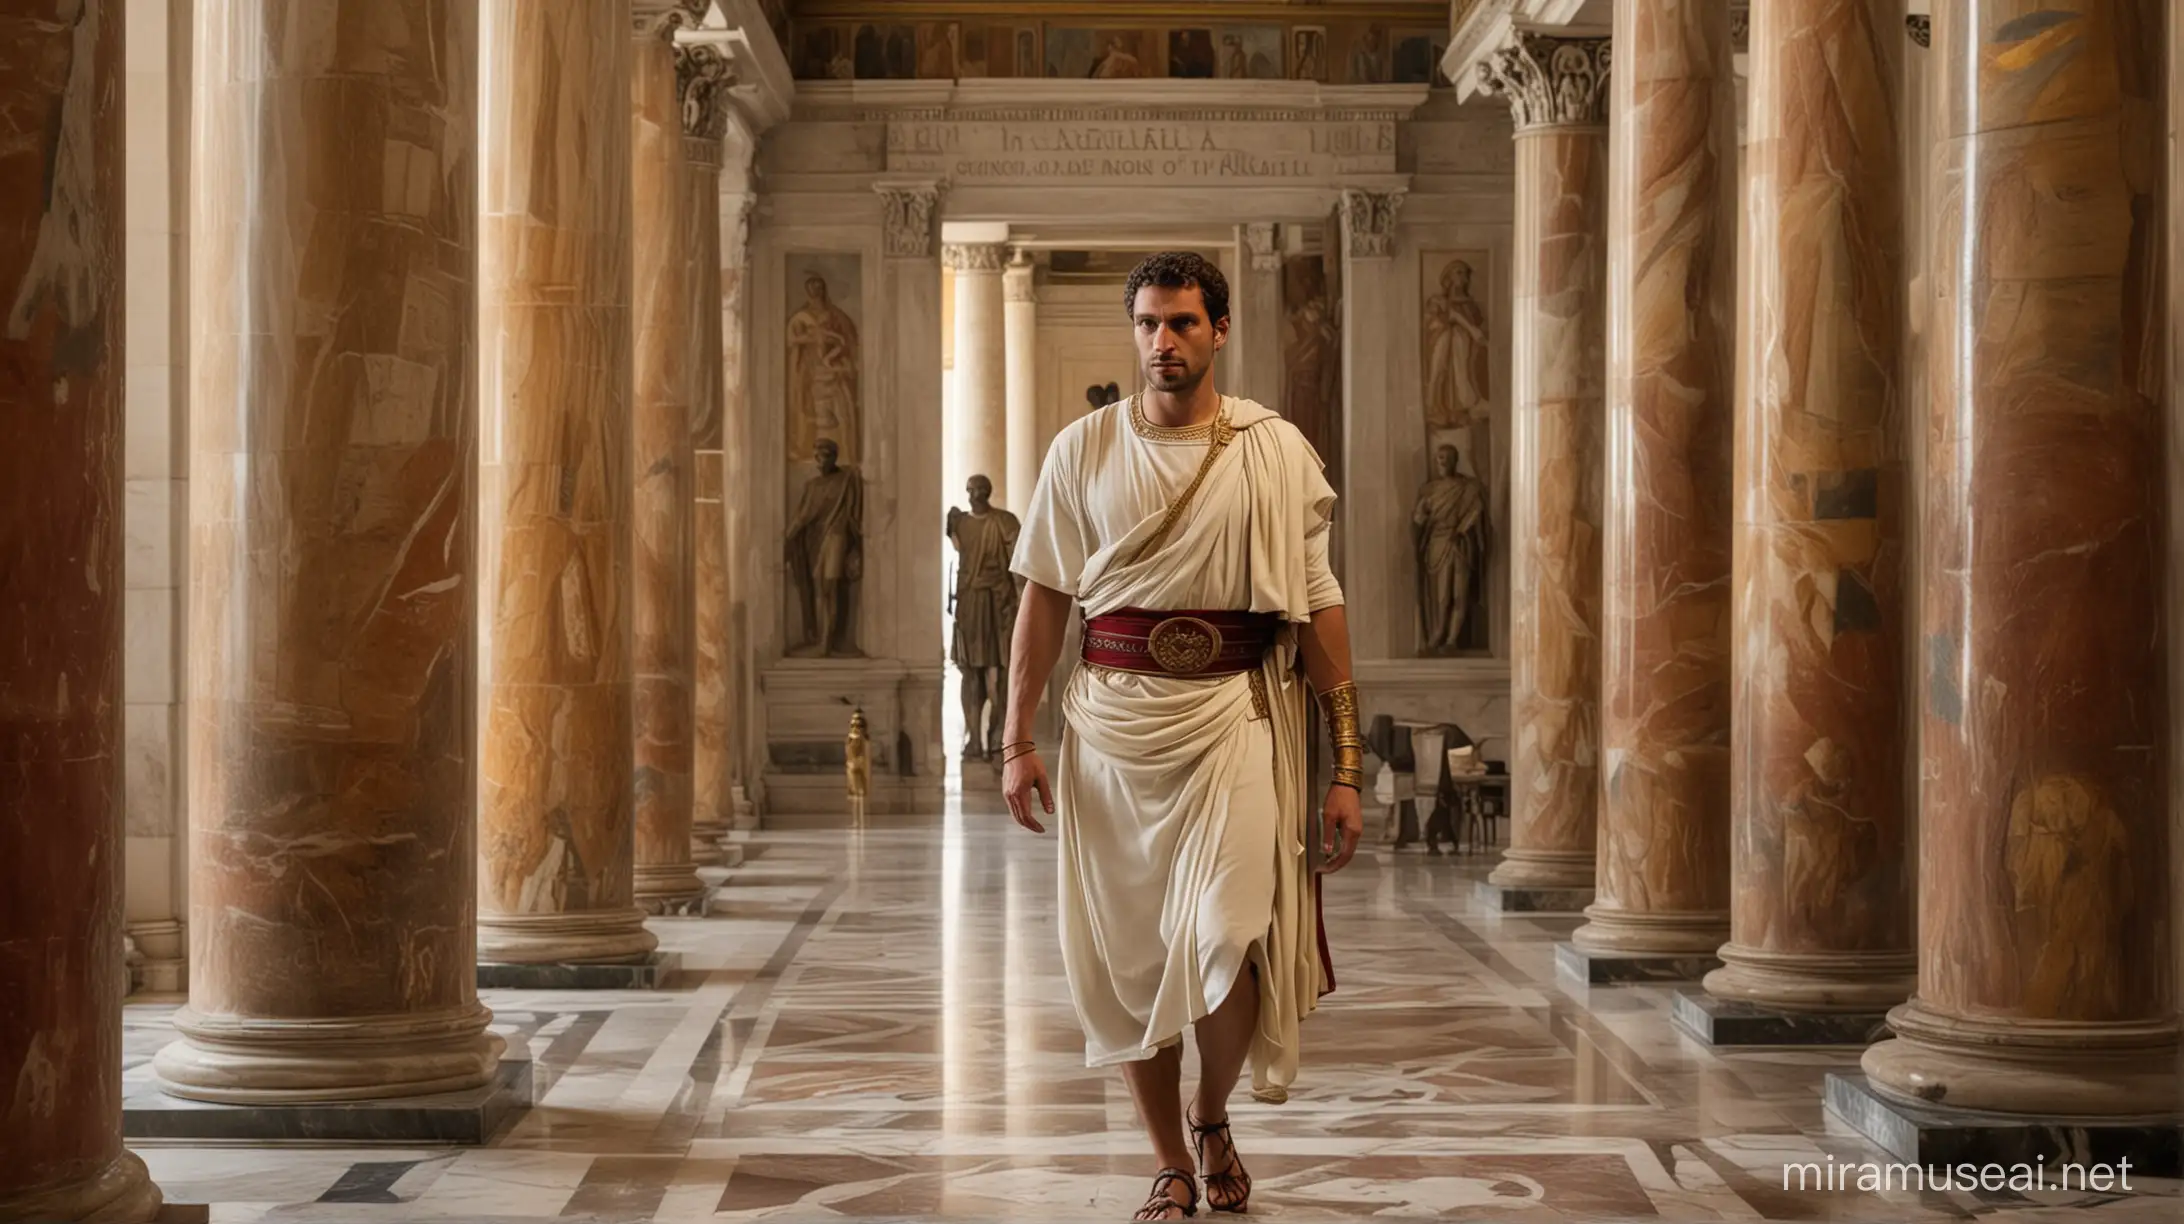 Title: "The Imperator's Audience"

Description:
Capture the essence of the Roman Empire in a scene depicting a dignified Roman man, in his early 30s, within the grandeur of his palace. He stands tall, exuding authority and refinement, dressed in a pristine white tunic adorned with intricate patterns, topped by a regal toga of deep crimson, symbolizing his status as a man of power and influence.

Surrounded by opulent marble columns and adorned with intricate frescoes depicting scenes of conquest and glory, the palace provides a majestic backdrop. The architecture should reflect the grandeur and sophistication of ancient Rome, with ornate details and impeccable craftsmanship.

Flanked on either side by two imposing Roman centurions, their gleaming armor and stoic expressions serving as a testament to the might of the Roman legions, the man strides confidently forward, his demeanor commanding respect and admiration.

The atmosphere is one of reverence and authority, with the man at the center embodying the ideals of Roman leadership – strength, wisdom, and dignity. As he moves through the palace halls, surrounded by his loyal guards, he exudes an aura of power and majesty, a true embodiment of the glory of the Roman Empire.